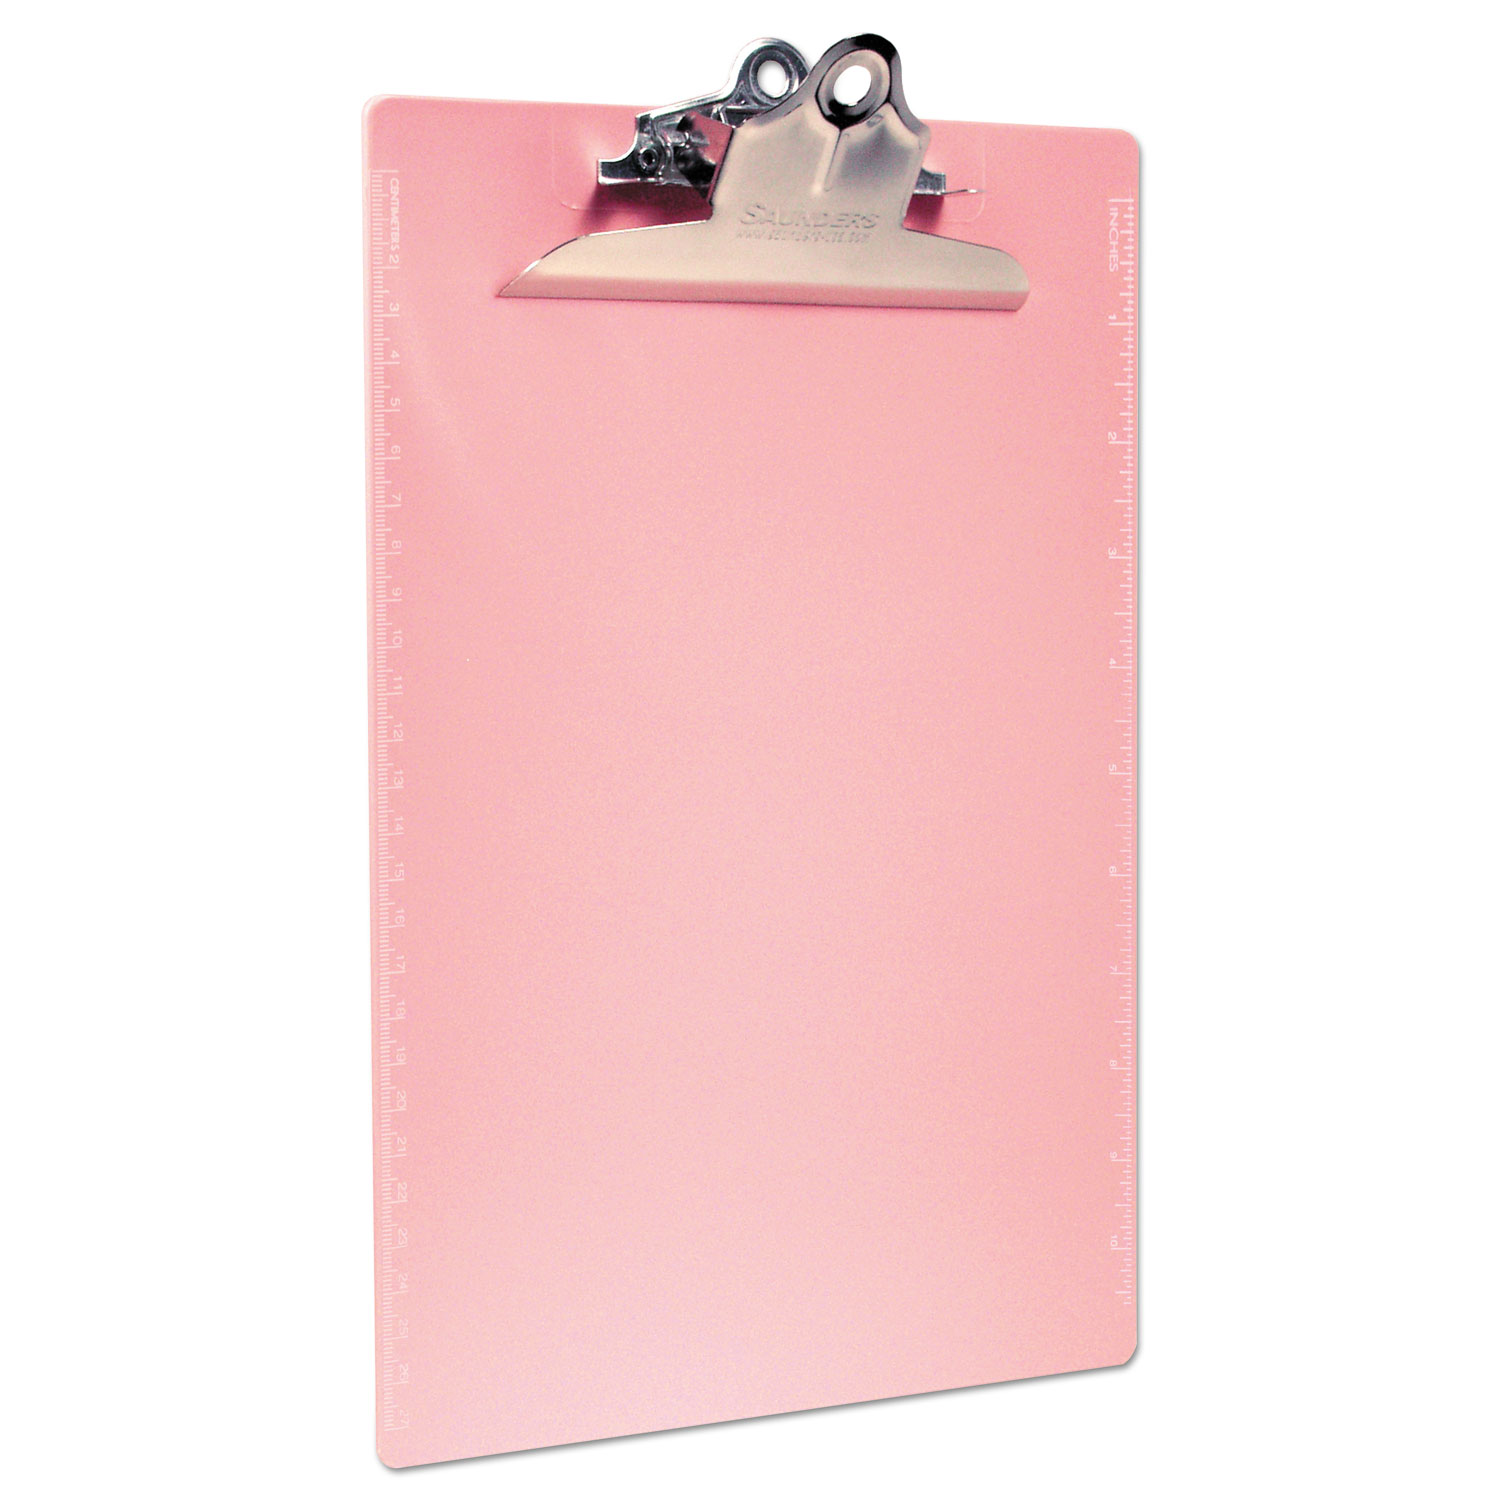 Recycled Plastic Clipboard with Ruler Edge, 1 Clip Cap, 8 1/2 x 12 Sheets, Pink